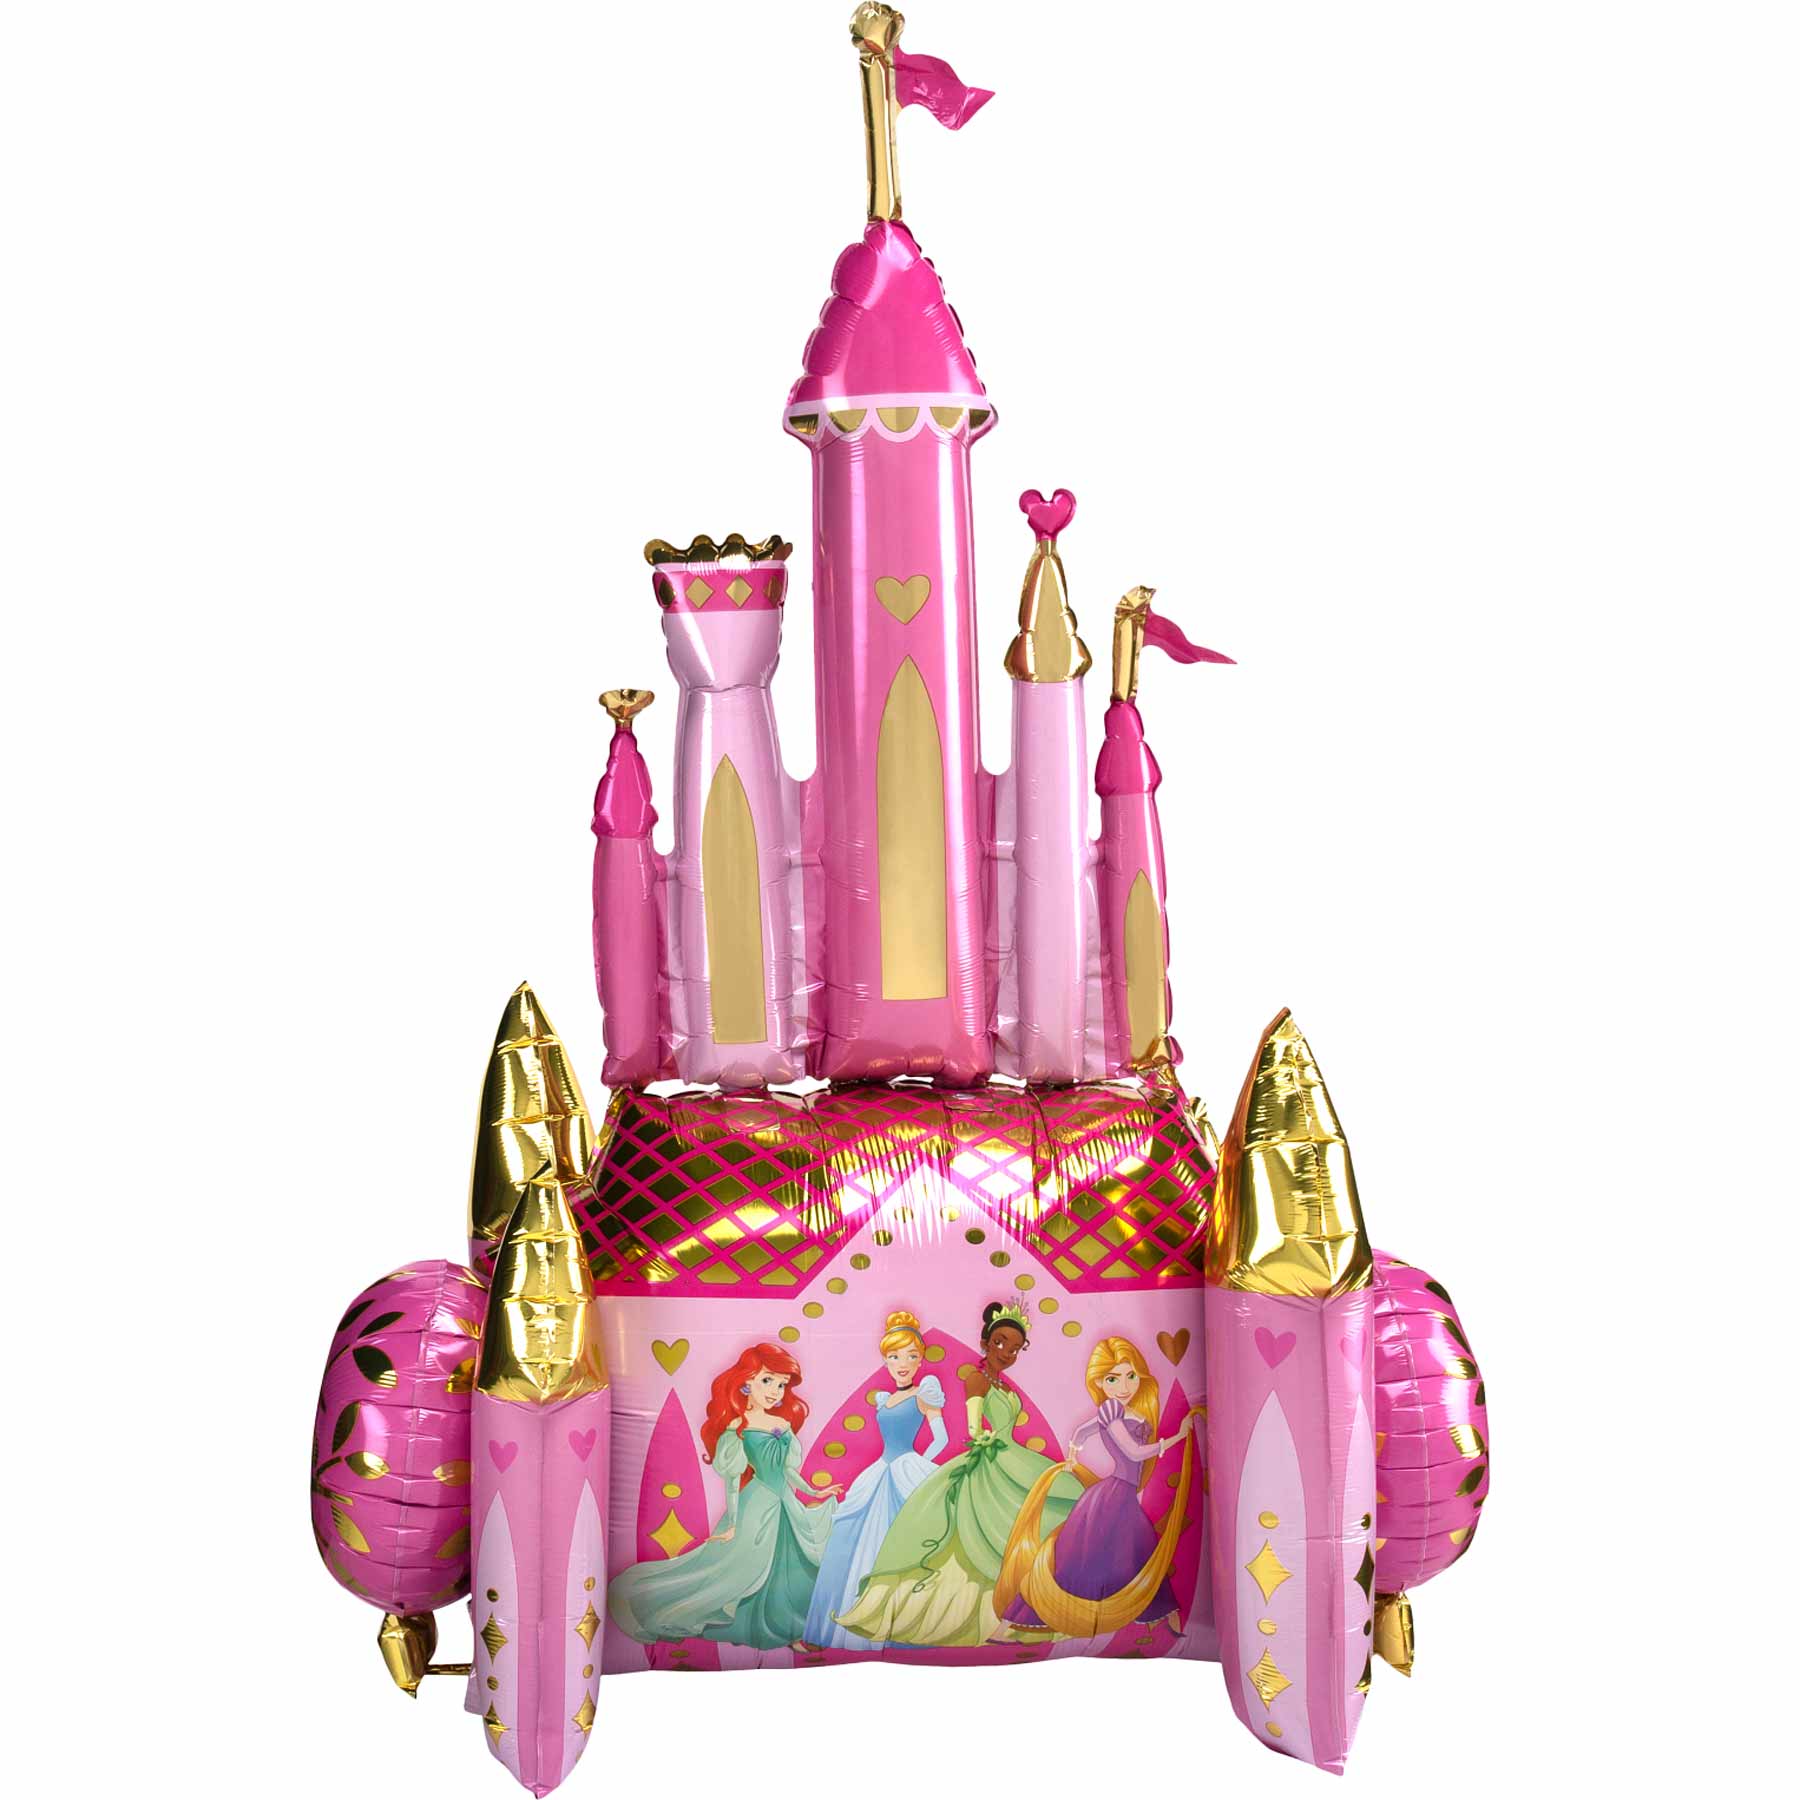 Princess Once Upon A Time Airwalker Balloon 88x138cm